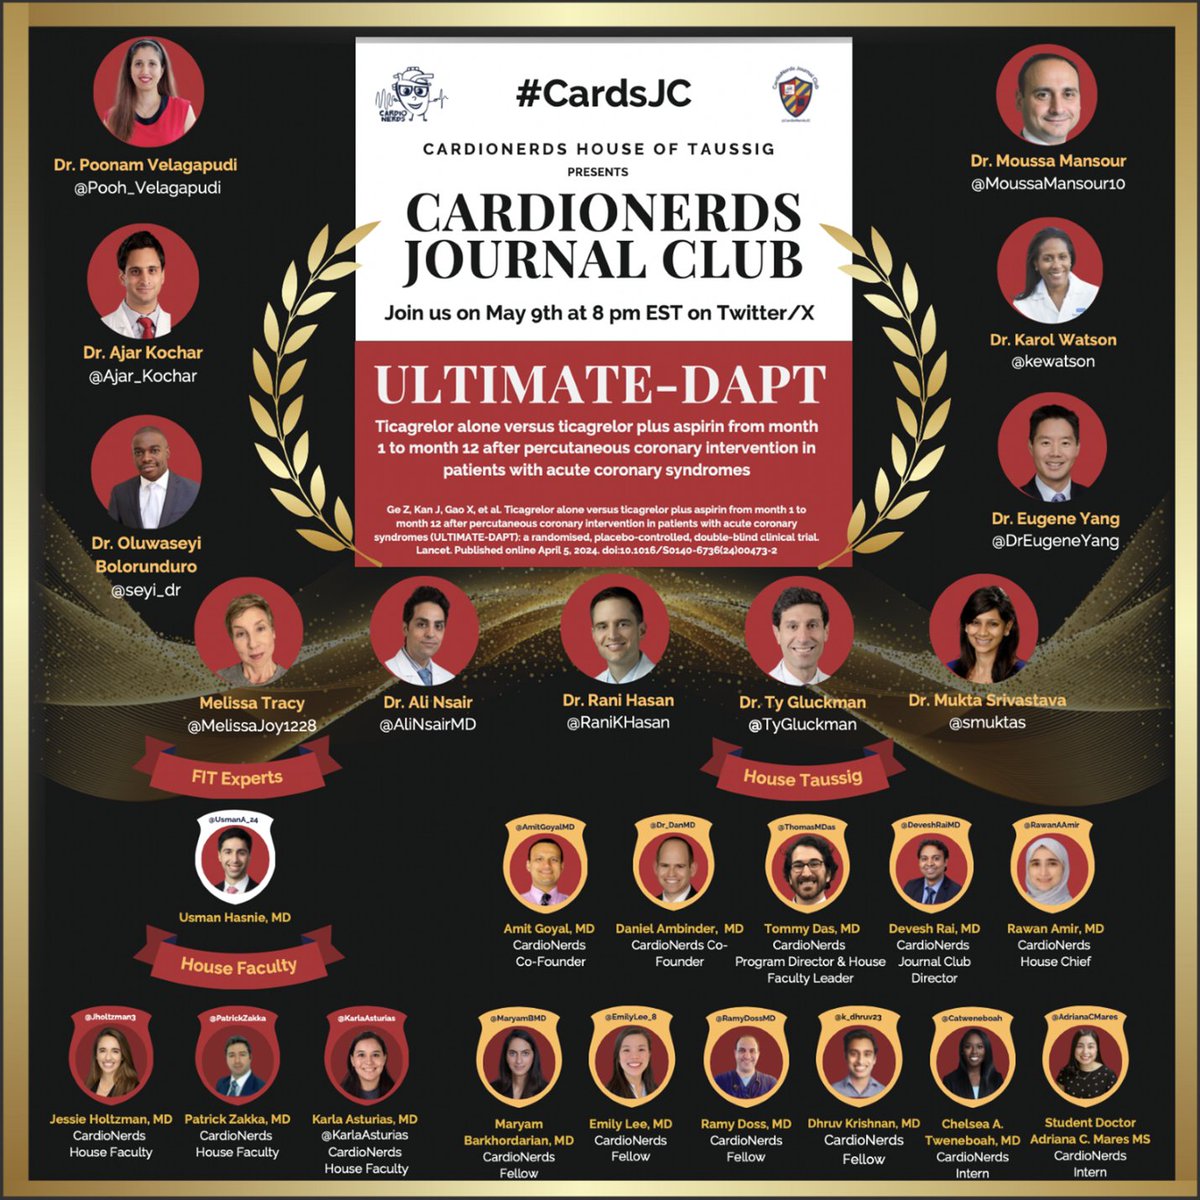 Join in, ask & answer Qs, learn from our amazing content experts 👇🏾and @CardioNerds Faculty, FITs & Family ❤ #CardsJC @Pooh_Velagapudi @Ajar_Kochar @kewatson @MoussaMansour10 @OluwaseyiBolor3 @AliNsairMD @RaniKHasan @tygluckman @smuktas @MelissaJoy1228 @DrEugeneYang @seyi_dr